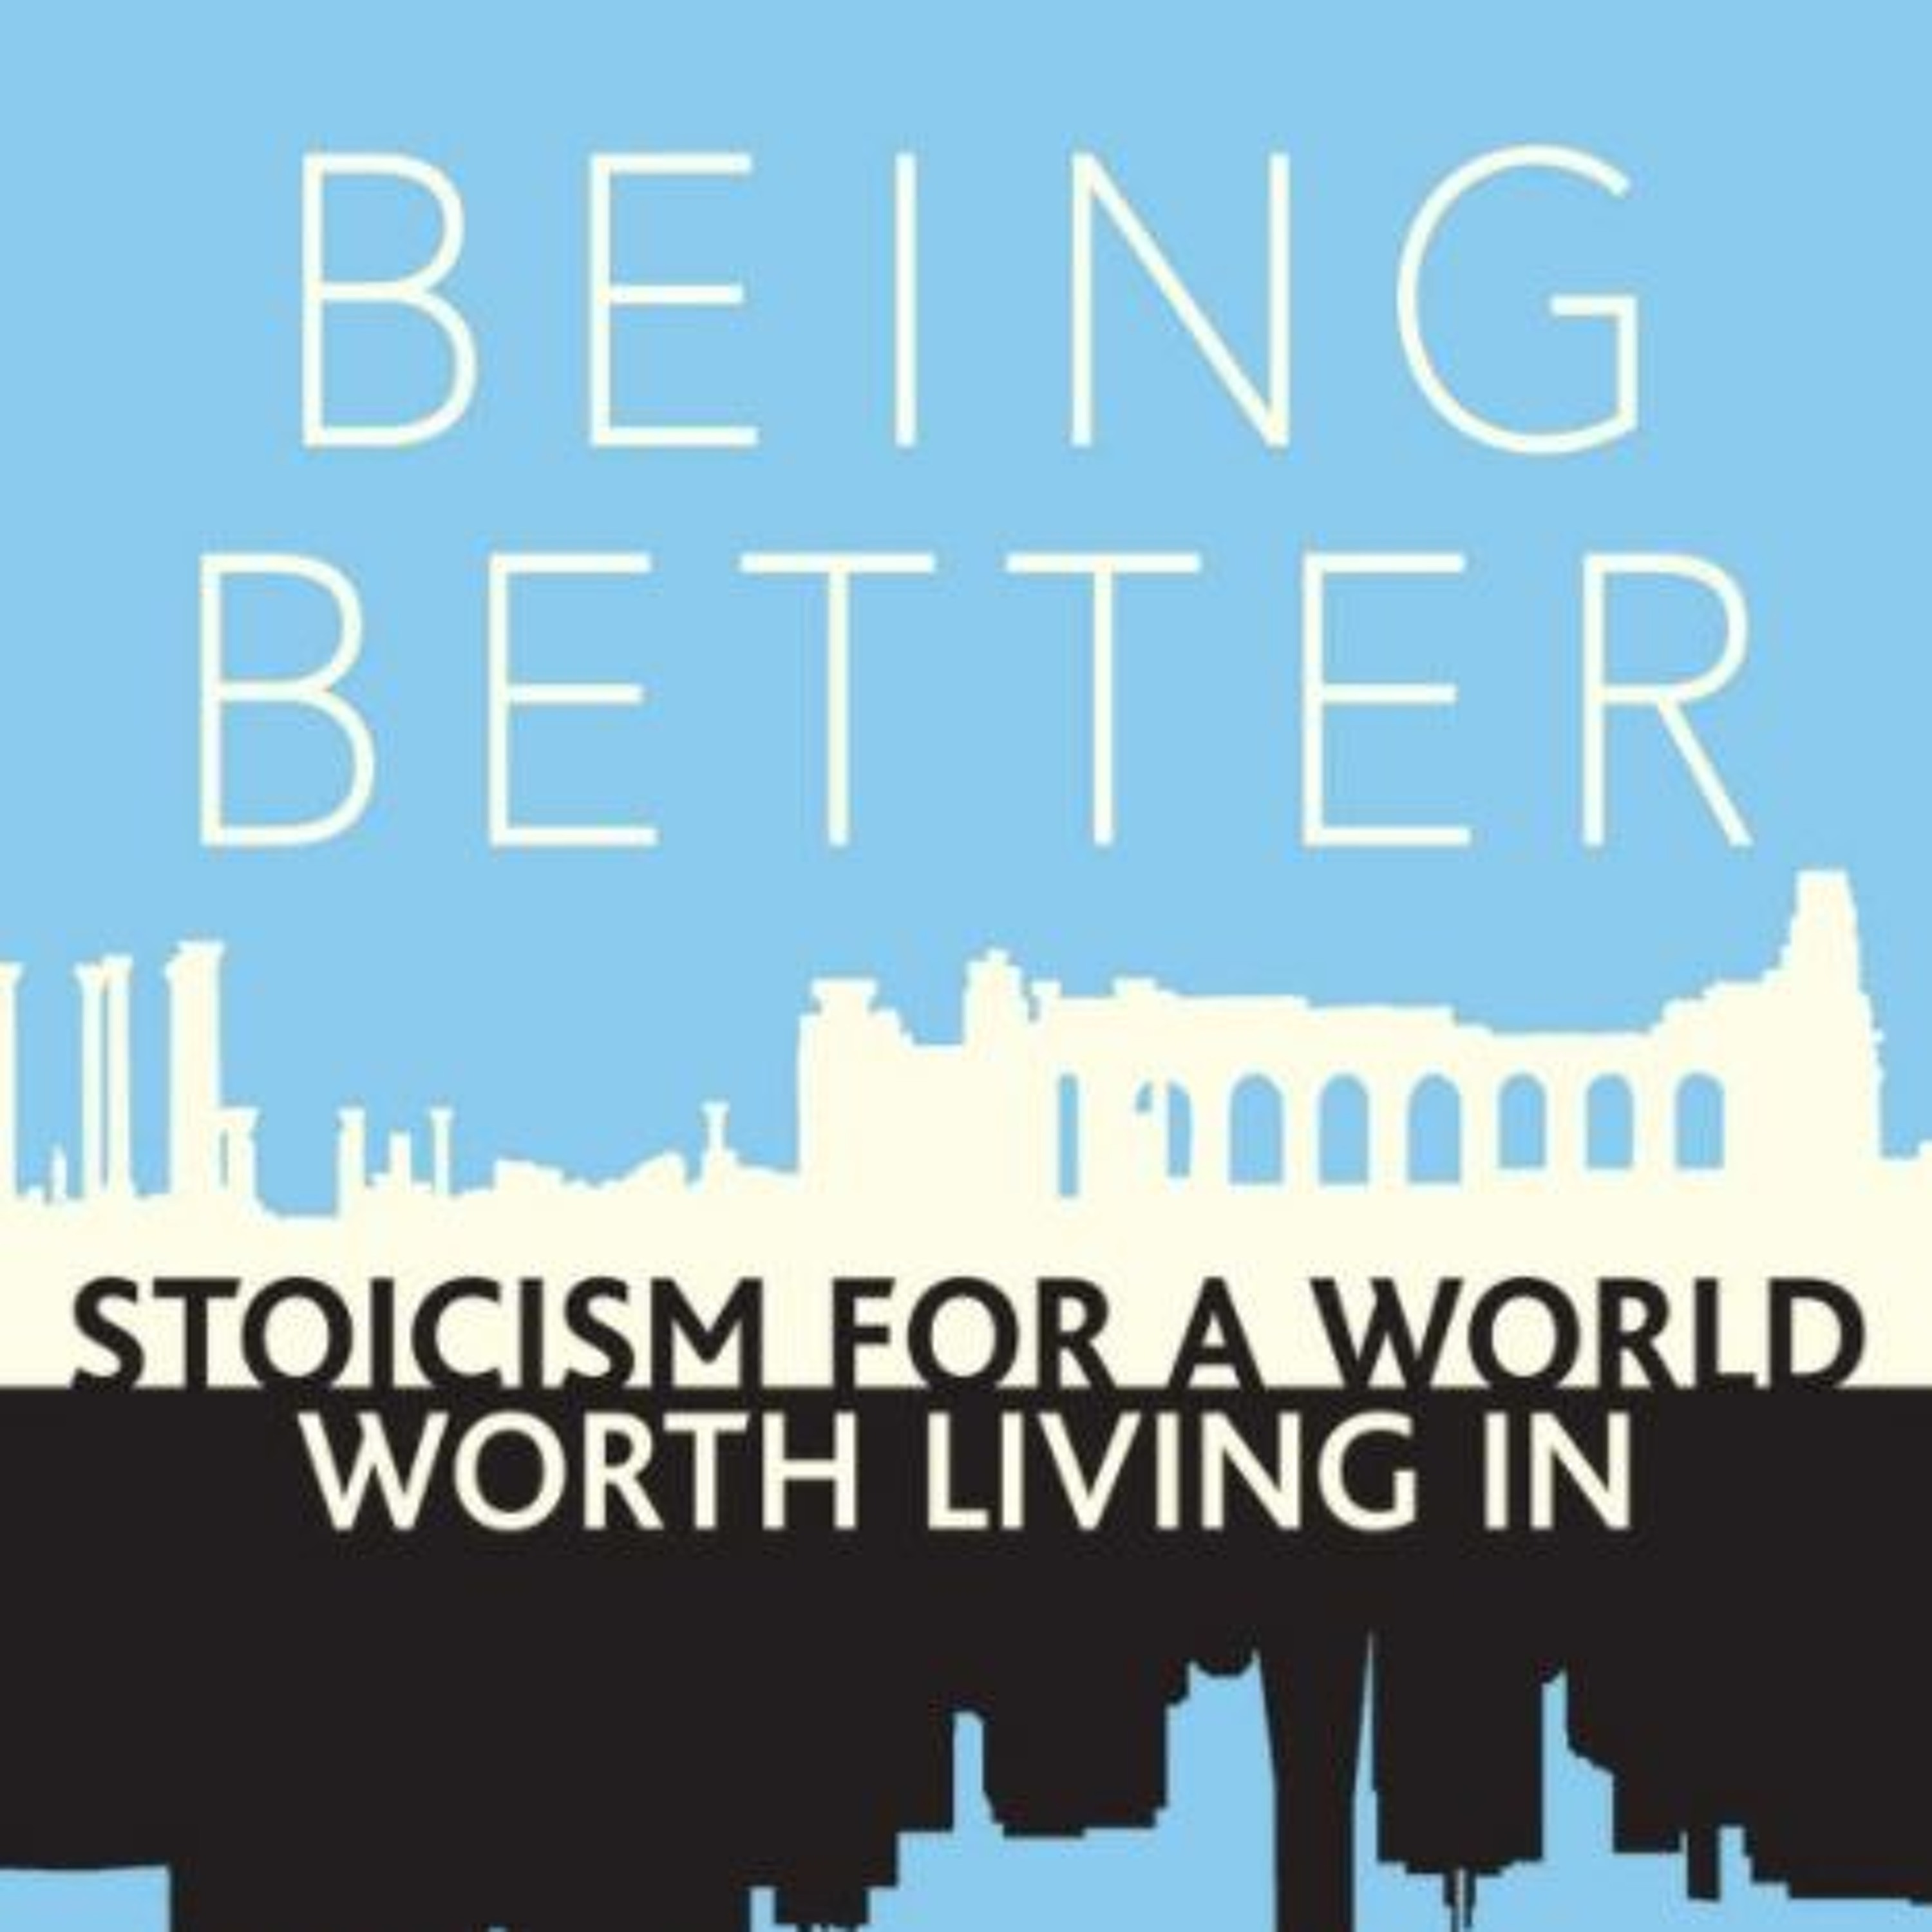 Episode 98 - Being Better: Stoicism For A World Worth Living In with Kai Whiting